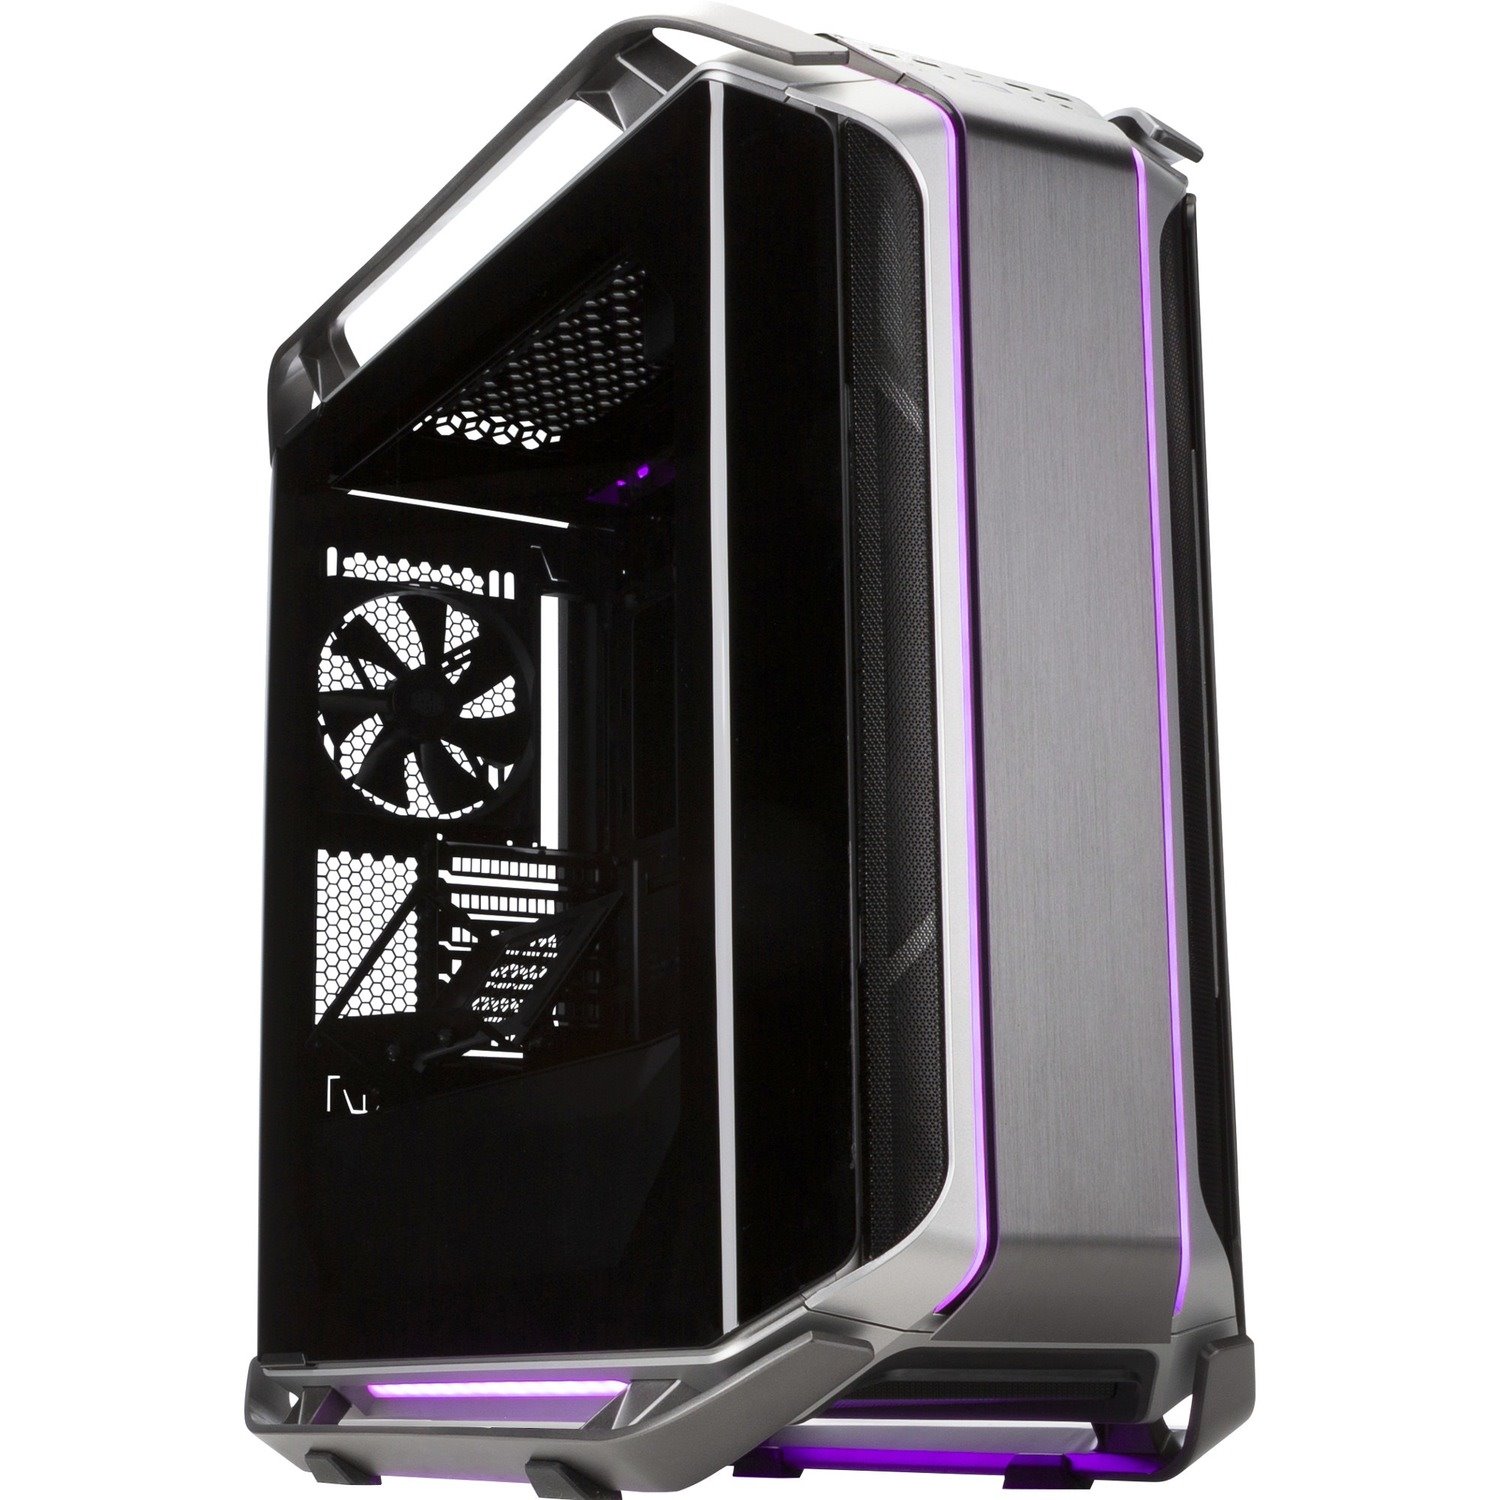 Cooler Master Cosmos C700M Computer Case - Mini ITX, Micro ATX, ATX, EATX Motherboard Supported - Full-tower - Steel, Tempered Glass - Silver, Black